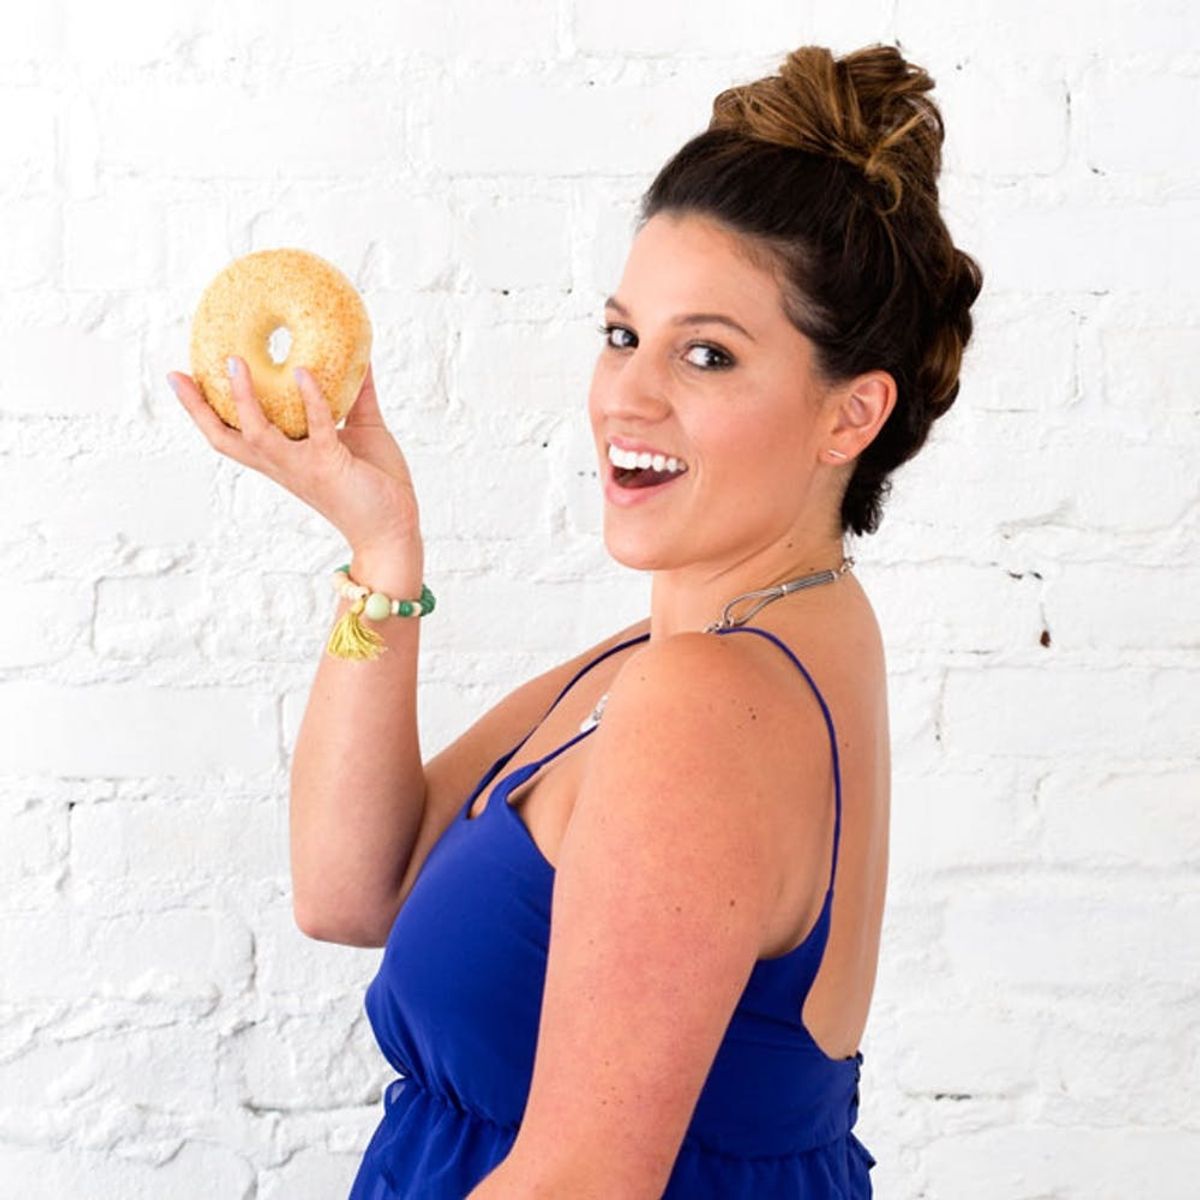 What! You Can DIY This Braided Bun In the Time It Takes to Eat a Bagel